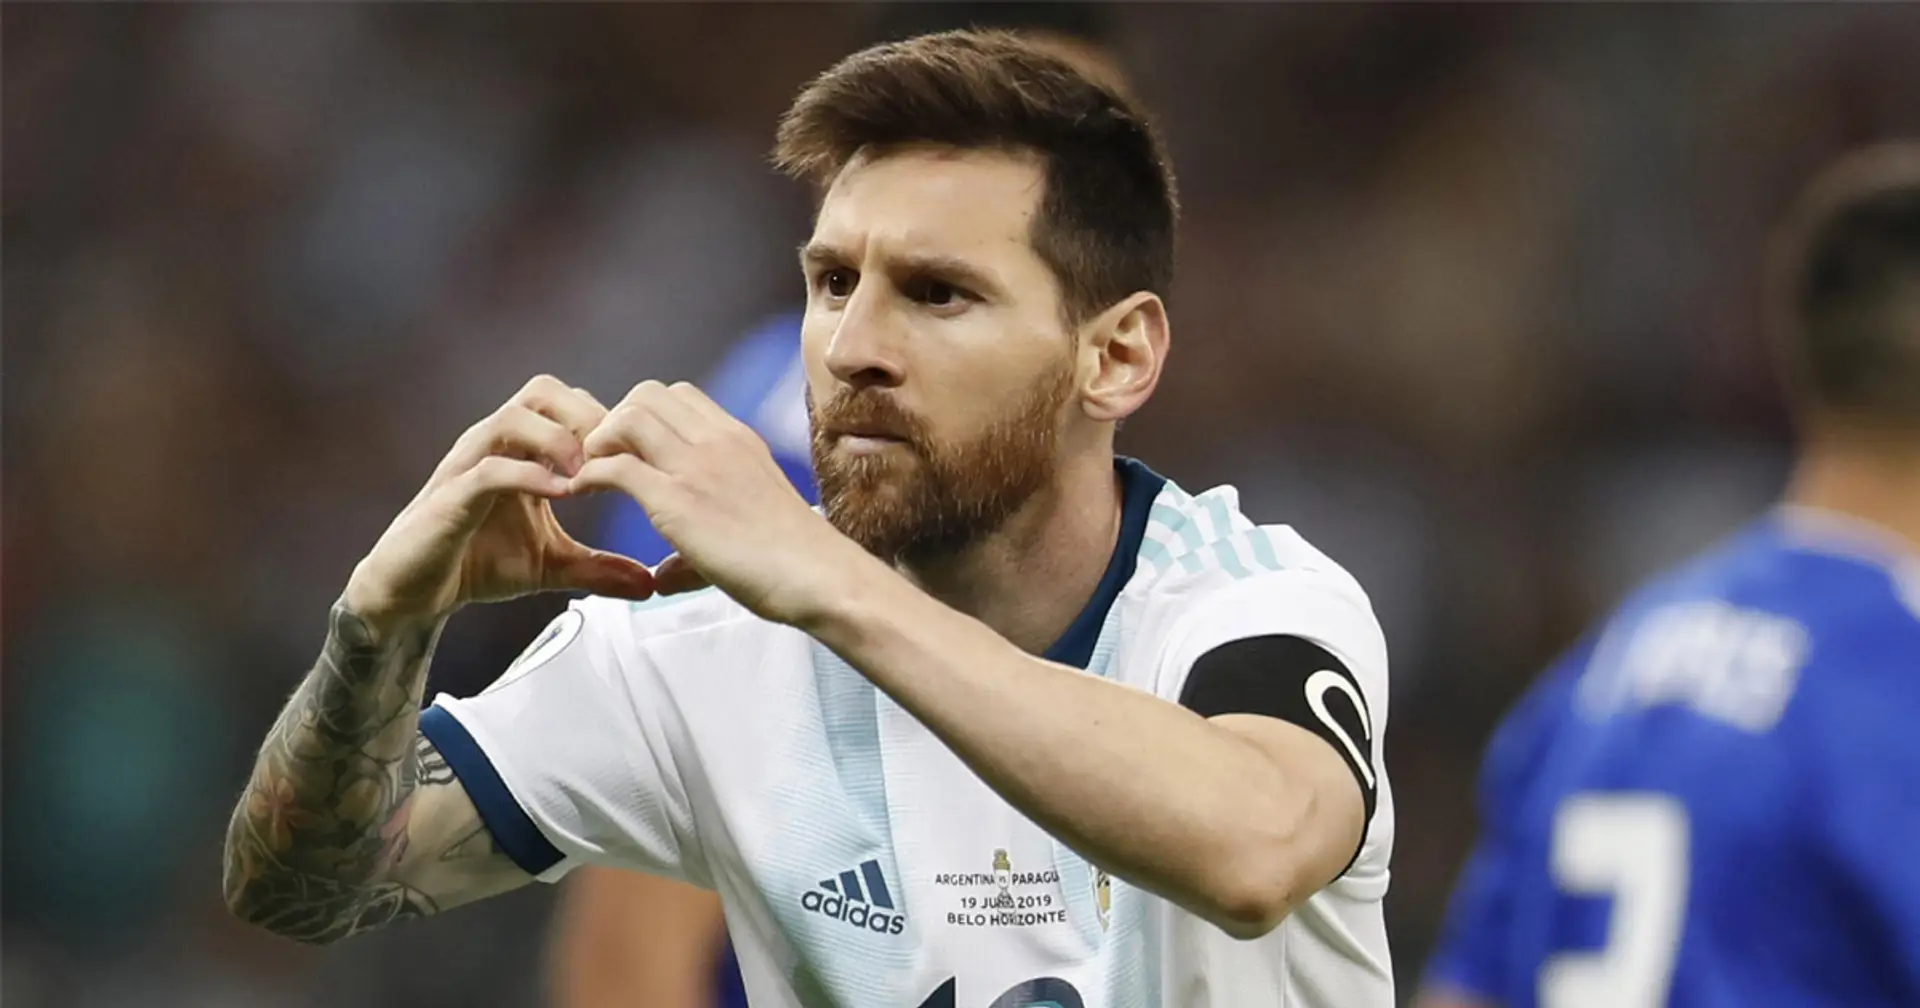 Official: Suspension over, Leo Messi will be available for Argentina's next 2 matches